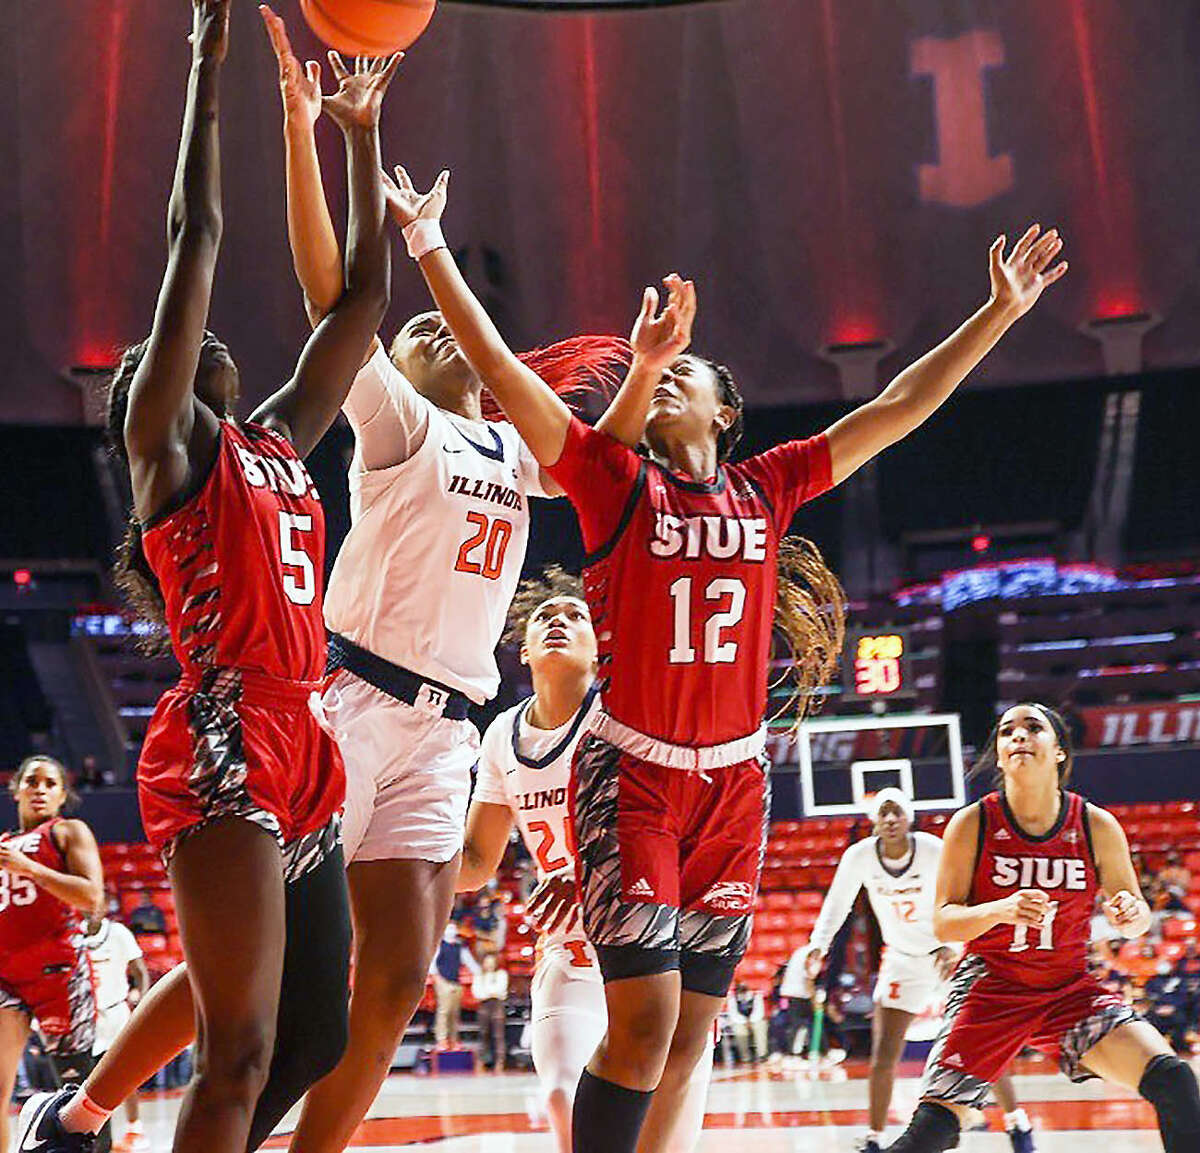 Erika Porter of Illinois (20) tries to puts up a shot between SIUE's Ajulu Thatha (5) and Mikia Keith (12) Thursday night at State Farm Center in Champaign. Also pictured is SIUE's Mikayla Kinnard (11).